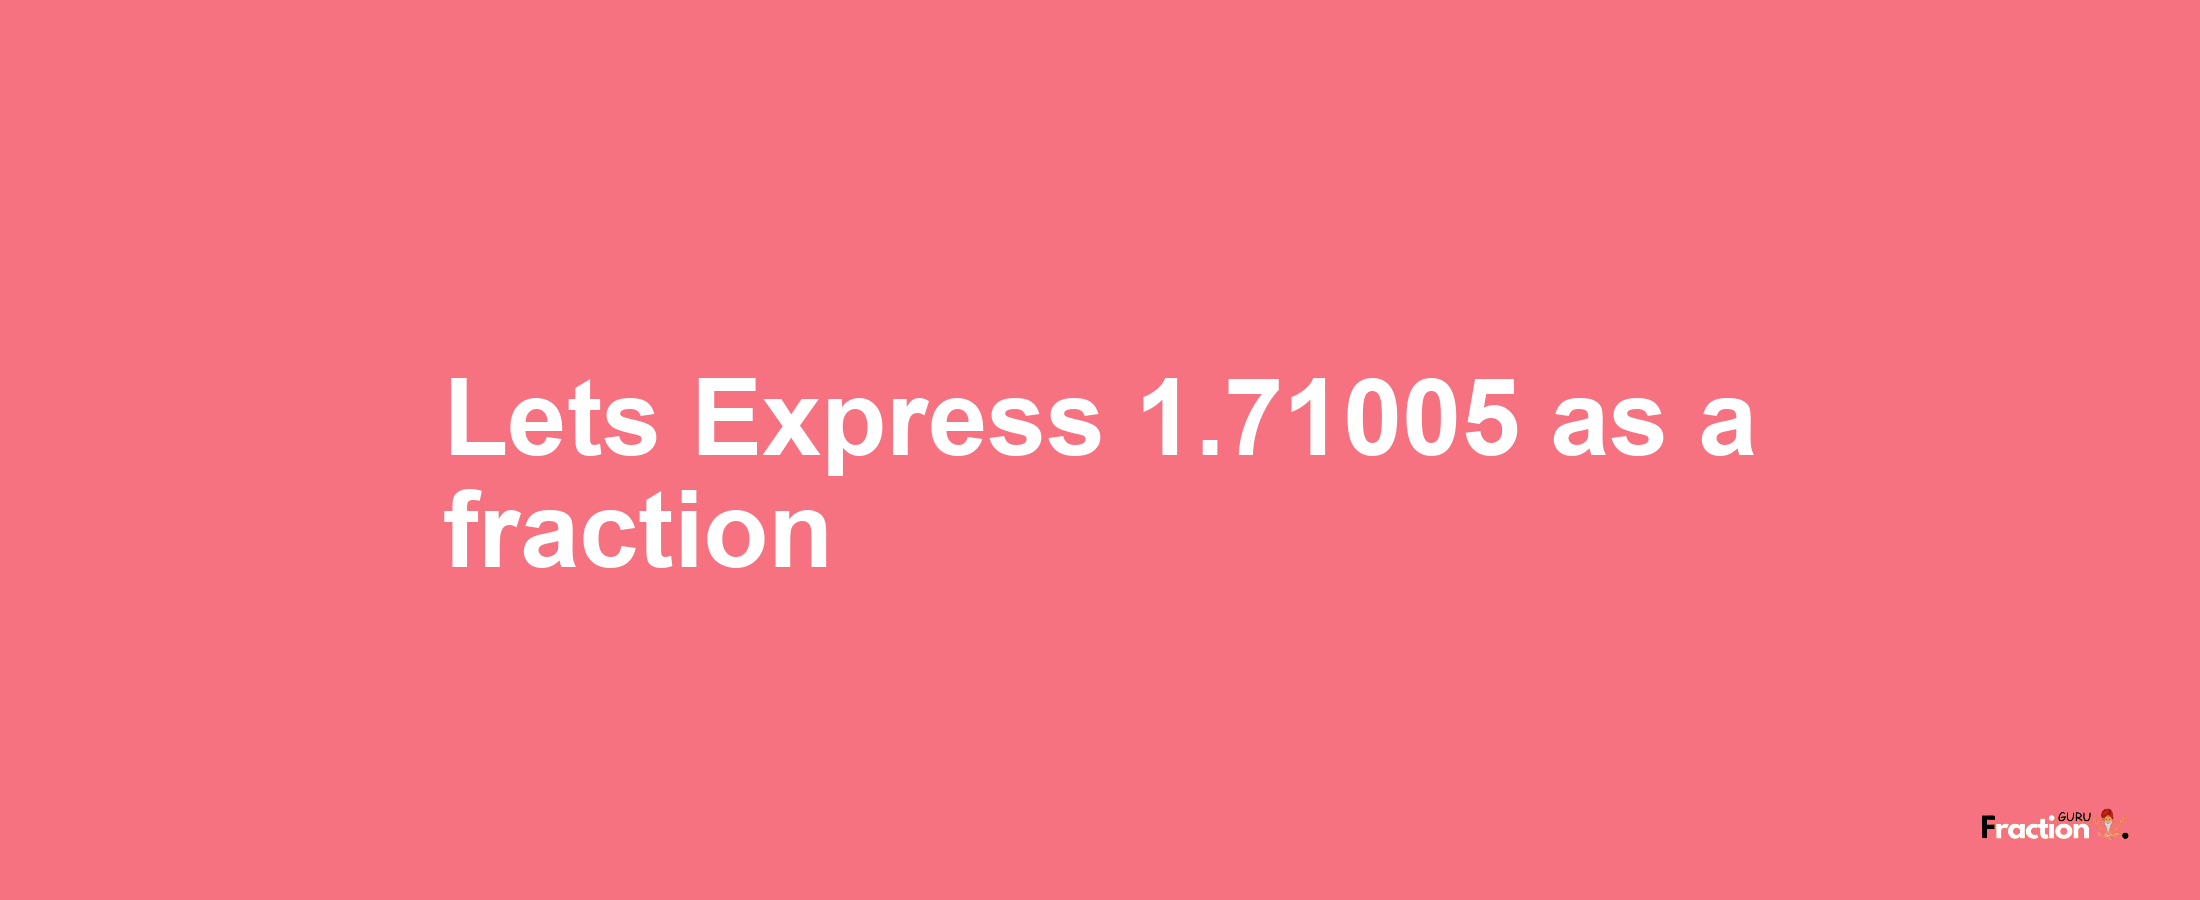 Lets Express 1.71005 as afraction